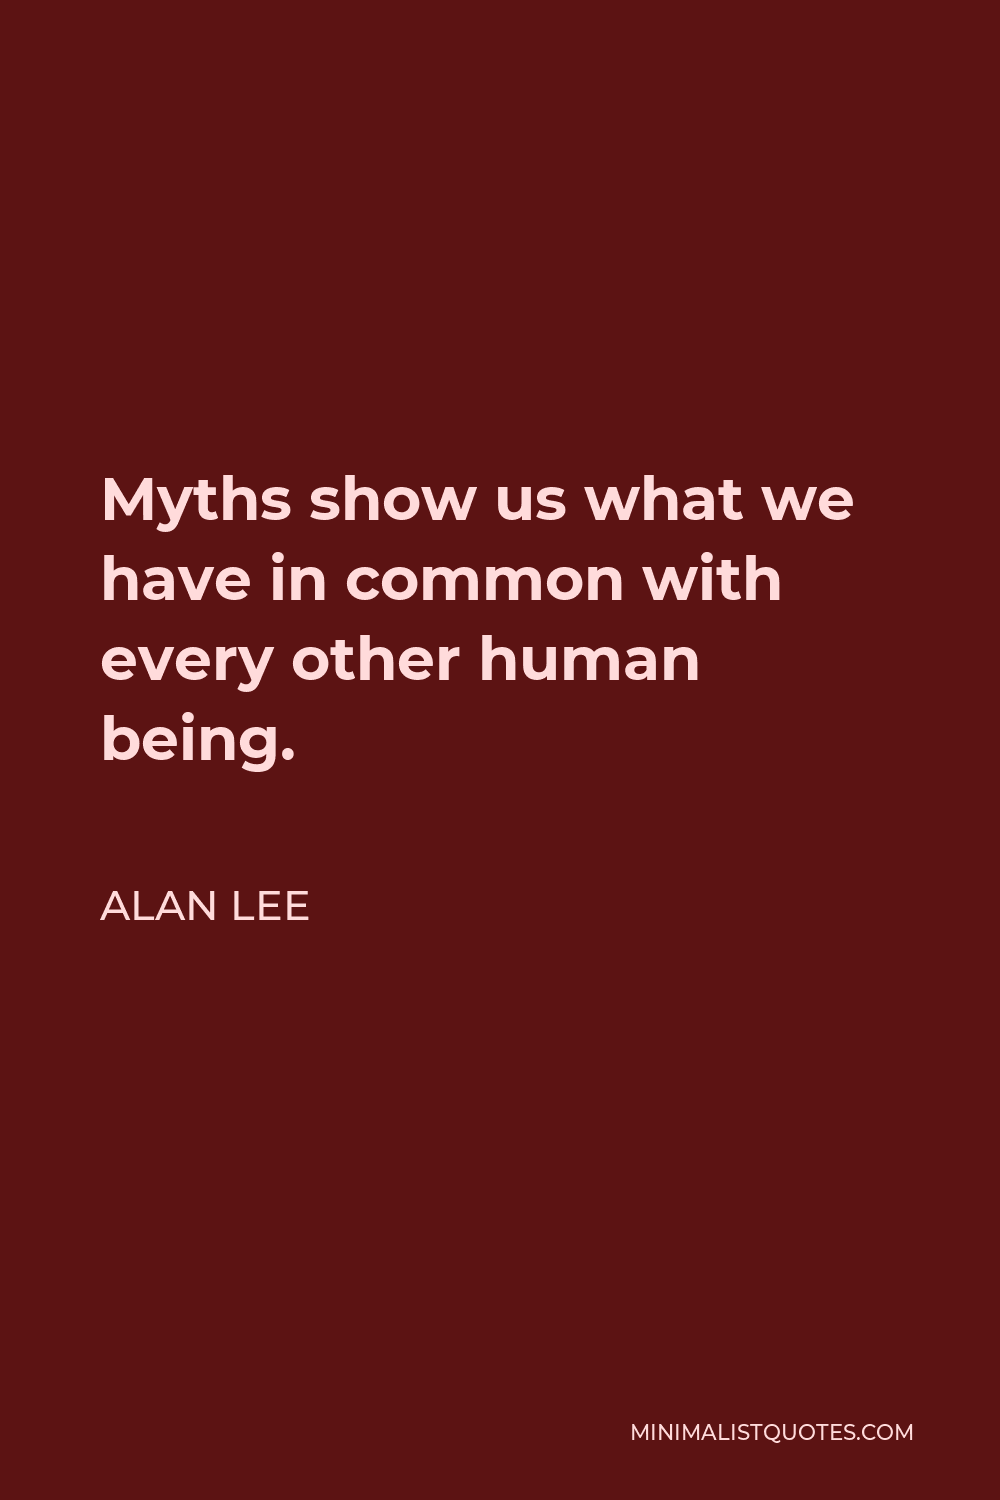 Alan Lee Quote - Myths show us what we have in common with every other human being.